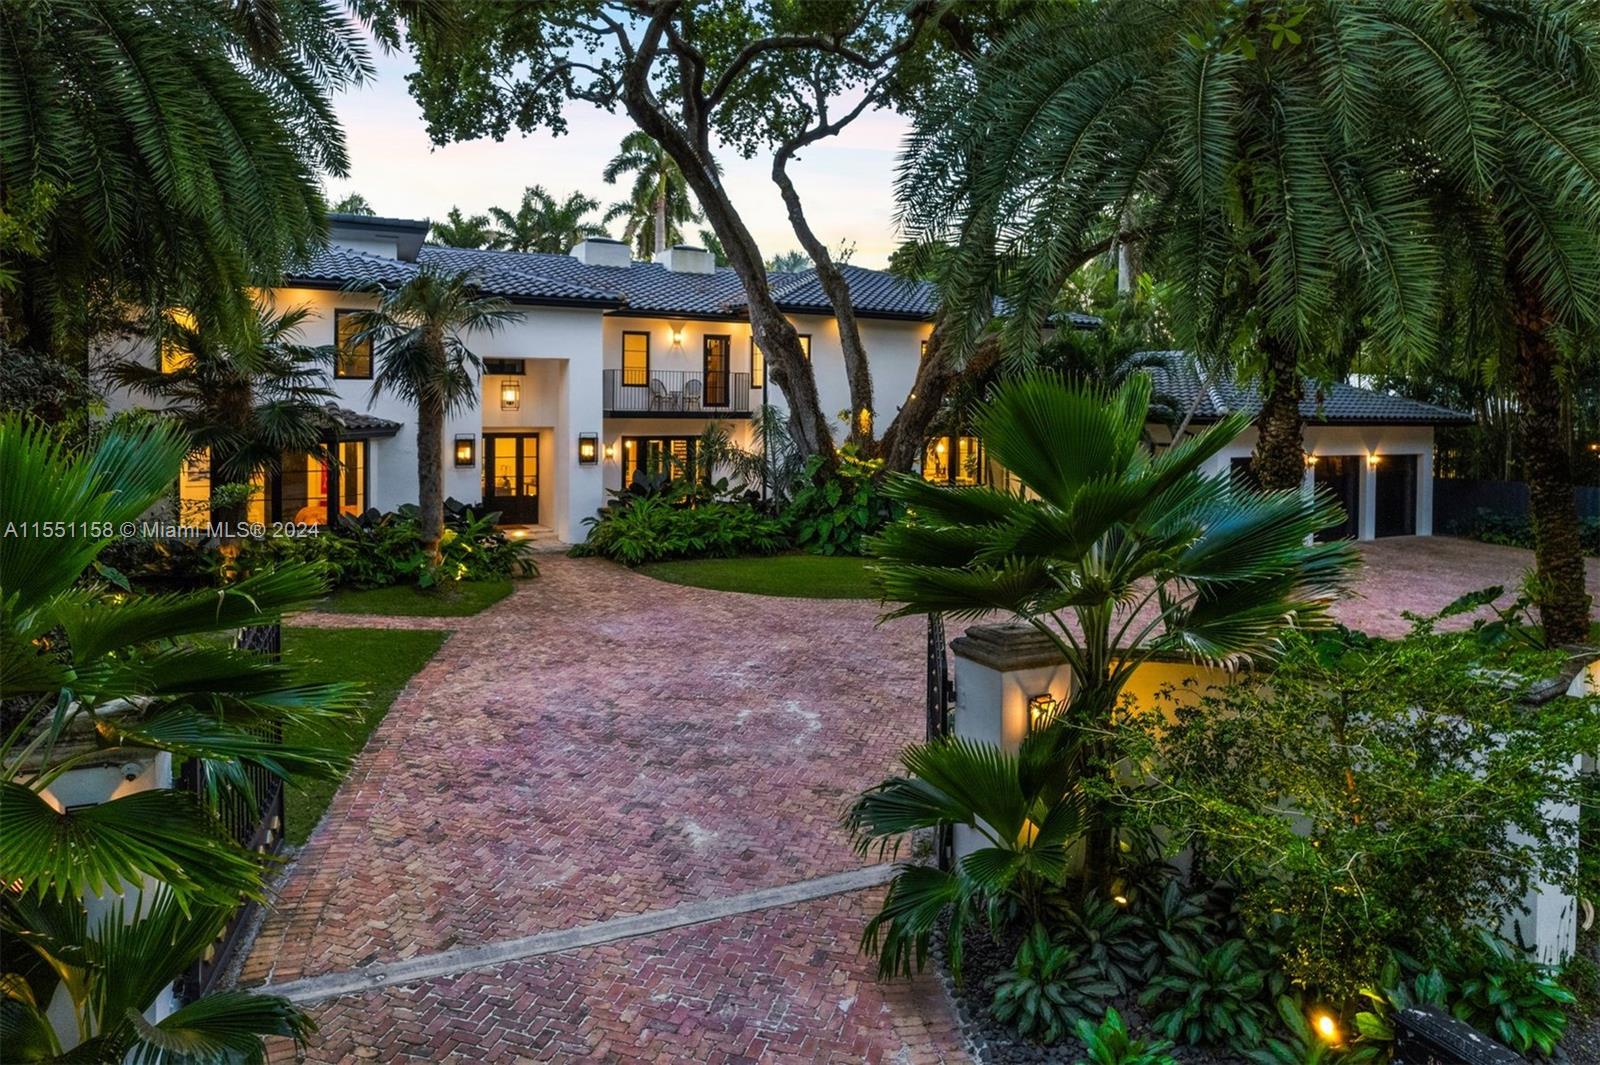 Completely renovated in 2022, the stunning 7,599 SF estate is tucked away on Leafy Way, a quiet private road in highly sought-after South Coconut Grove. With 20,125 SF of lush tropical grounds, the property presents a serene oasis with optimal privacy and gated entry. The 4-BD, 5.5-BA residence showcases spectacular light-filled living spaces featuring double-height ceilings, premium finishes, and high-end fixtures, epitomizing luxury living. A gourmet kitchen features floor-to-ceiling cabinetry, expansive center island, and top-of-the-line appliances. The beautiful backyard includes a summer kitchen and heated pool with waterfall jacuzzi. Additional features include a new roof, whole house generator, Savant smart home system, impact windows/doors, and a 3-car garage with MyQ Smart doors.